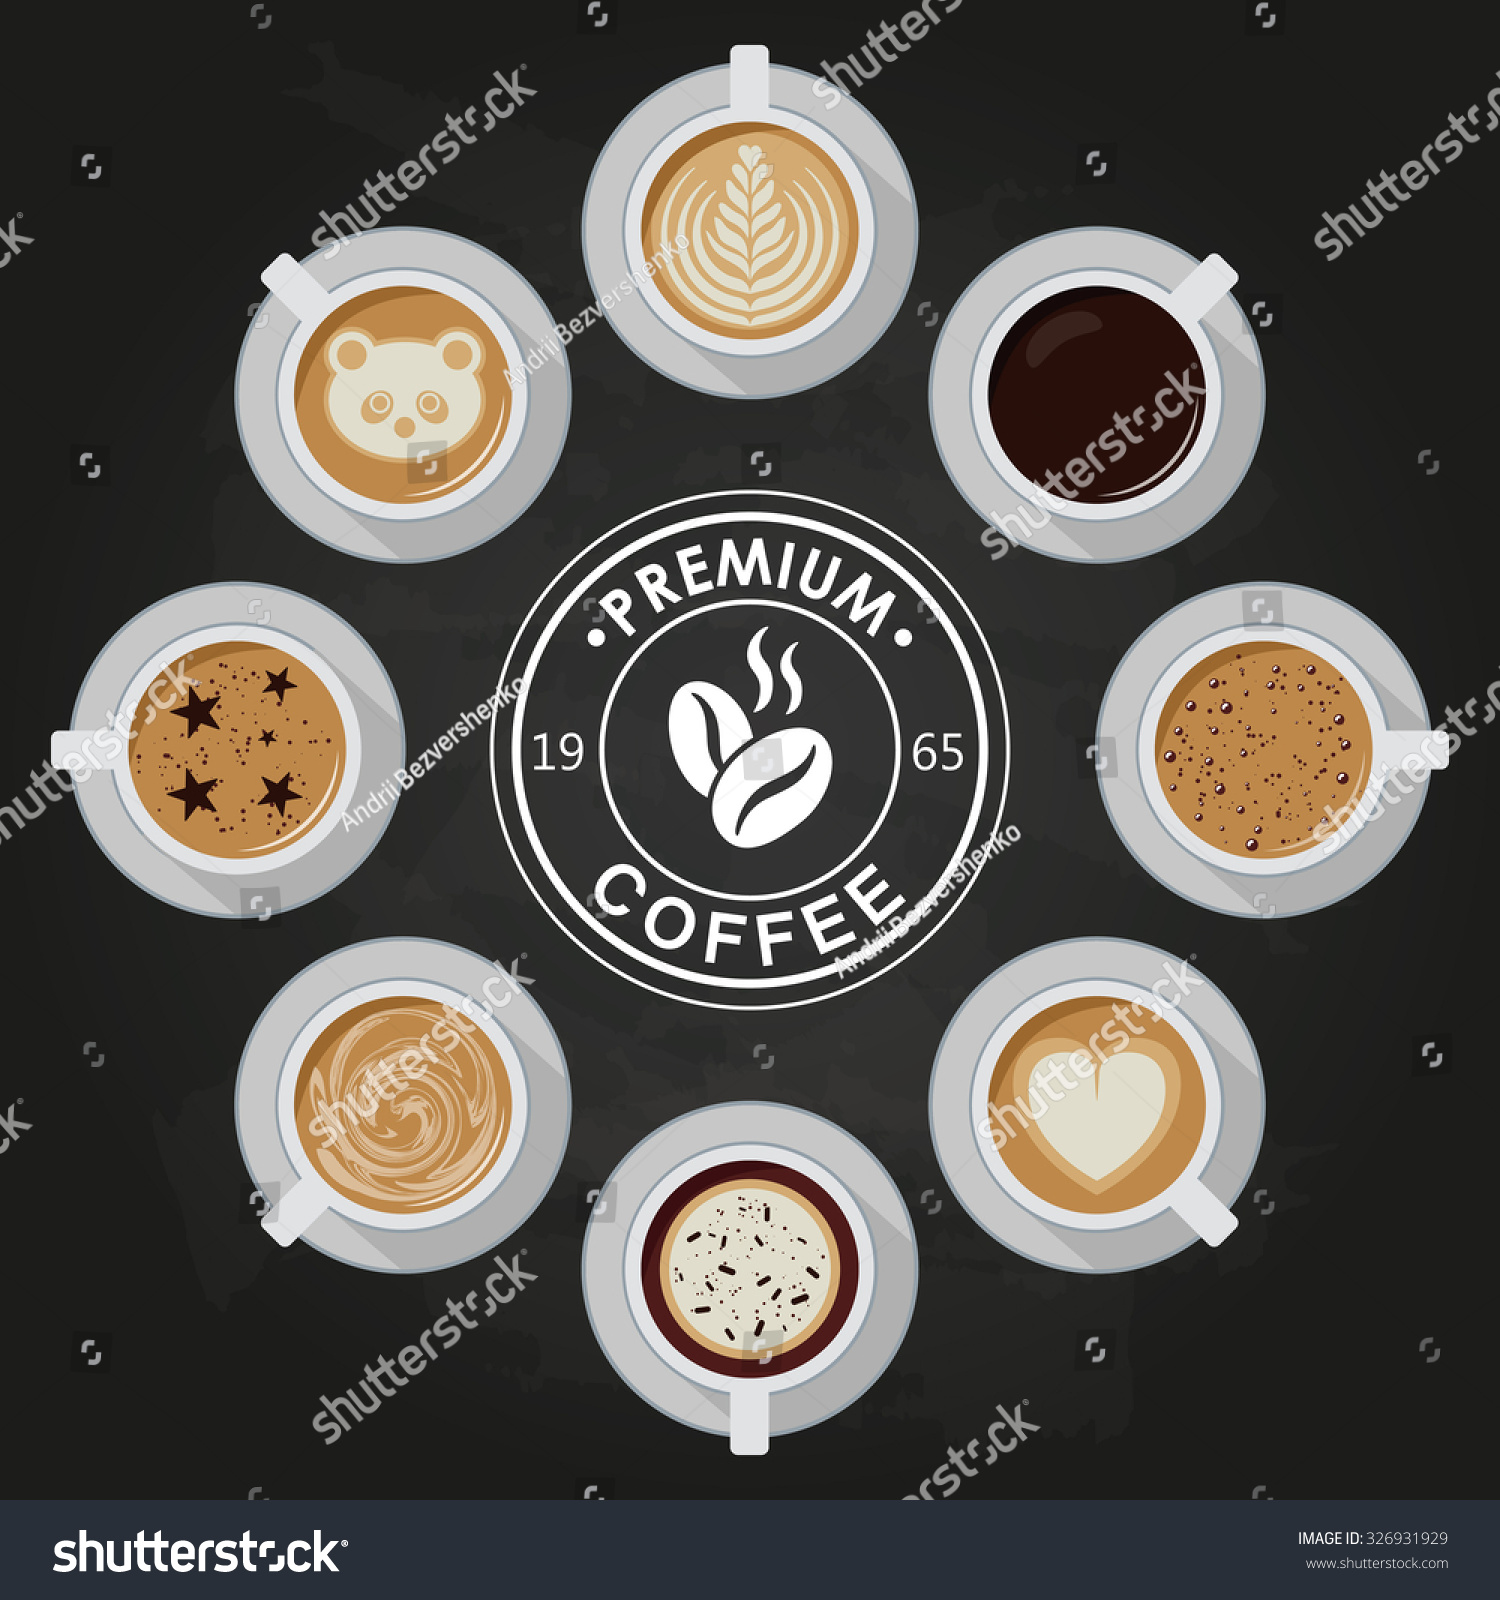 Image result for americano coffee pictures